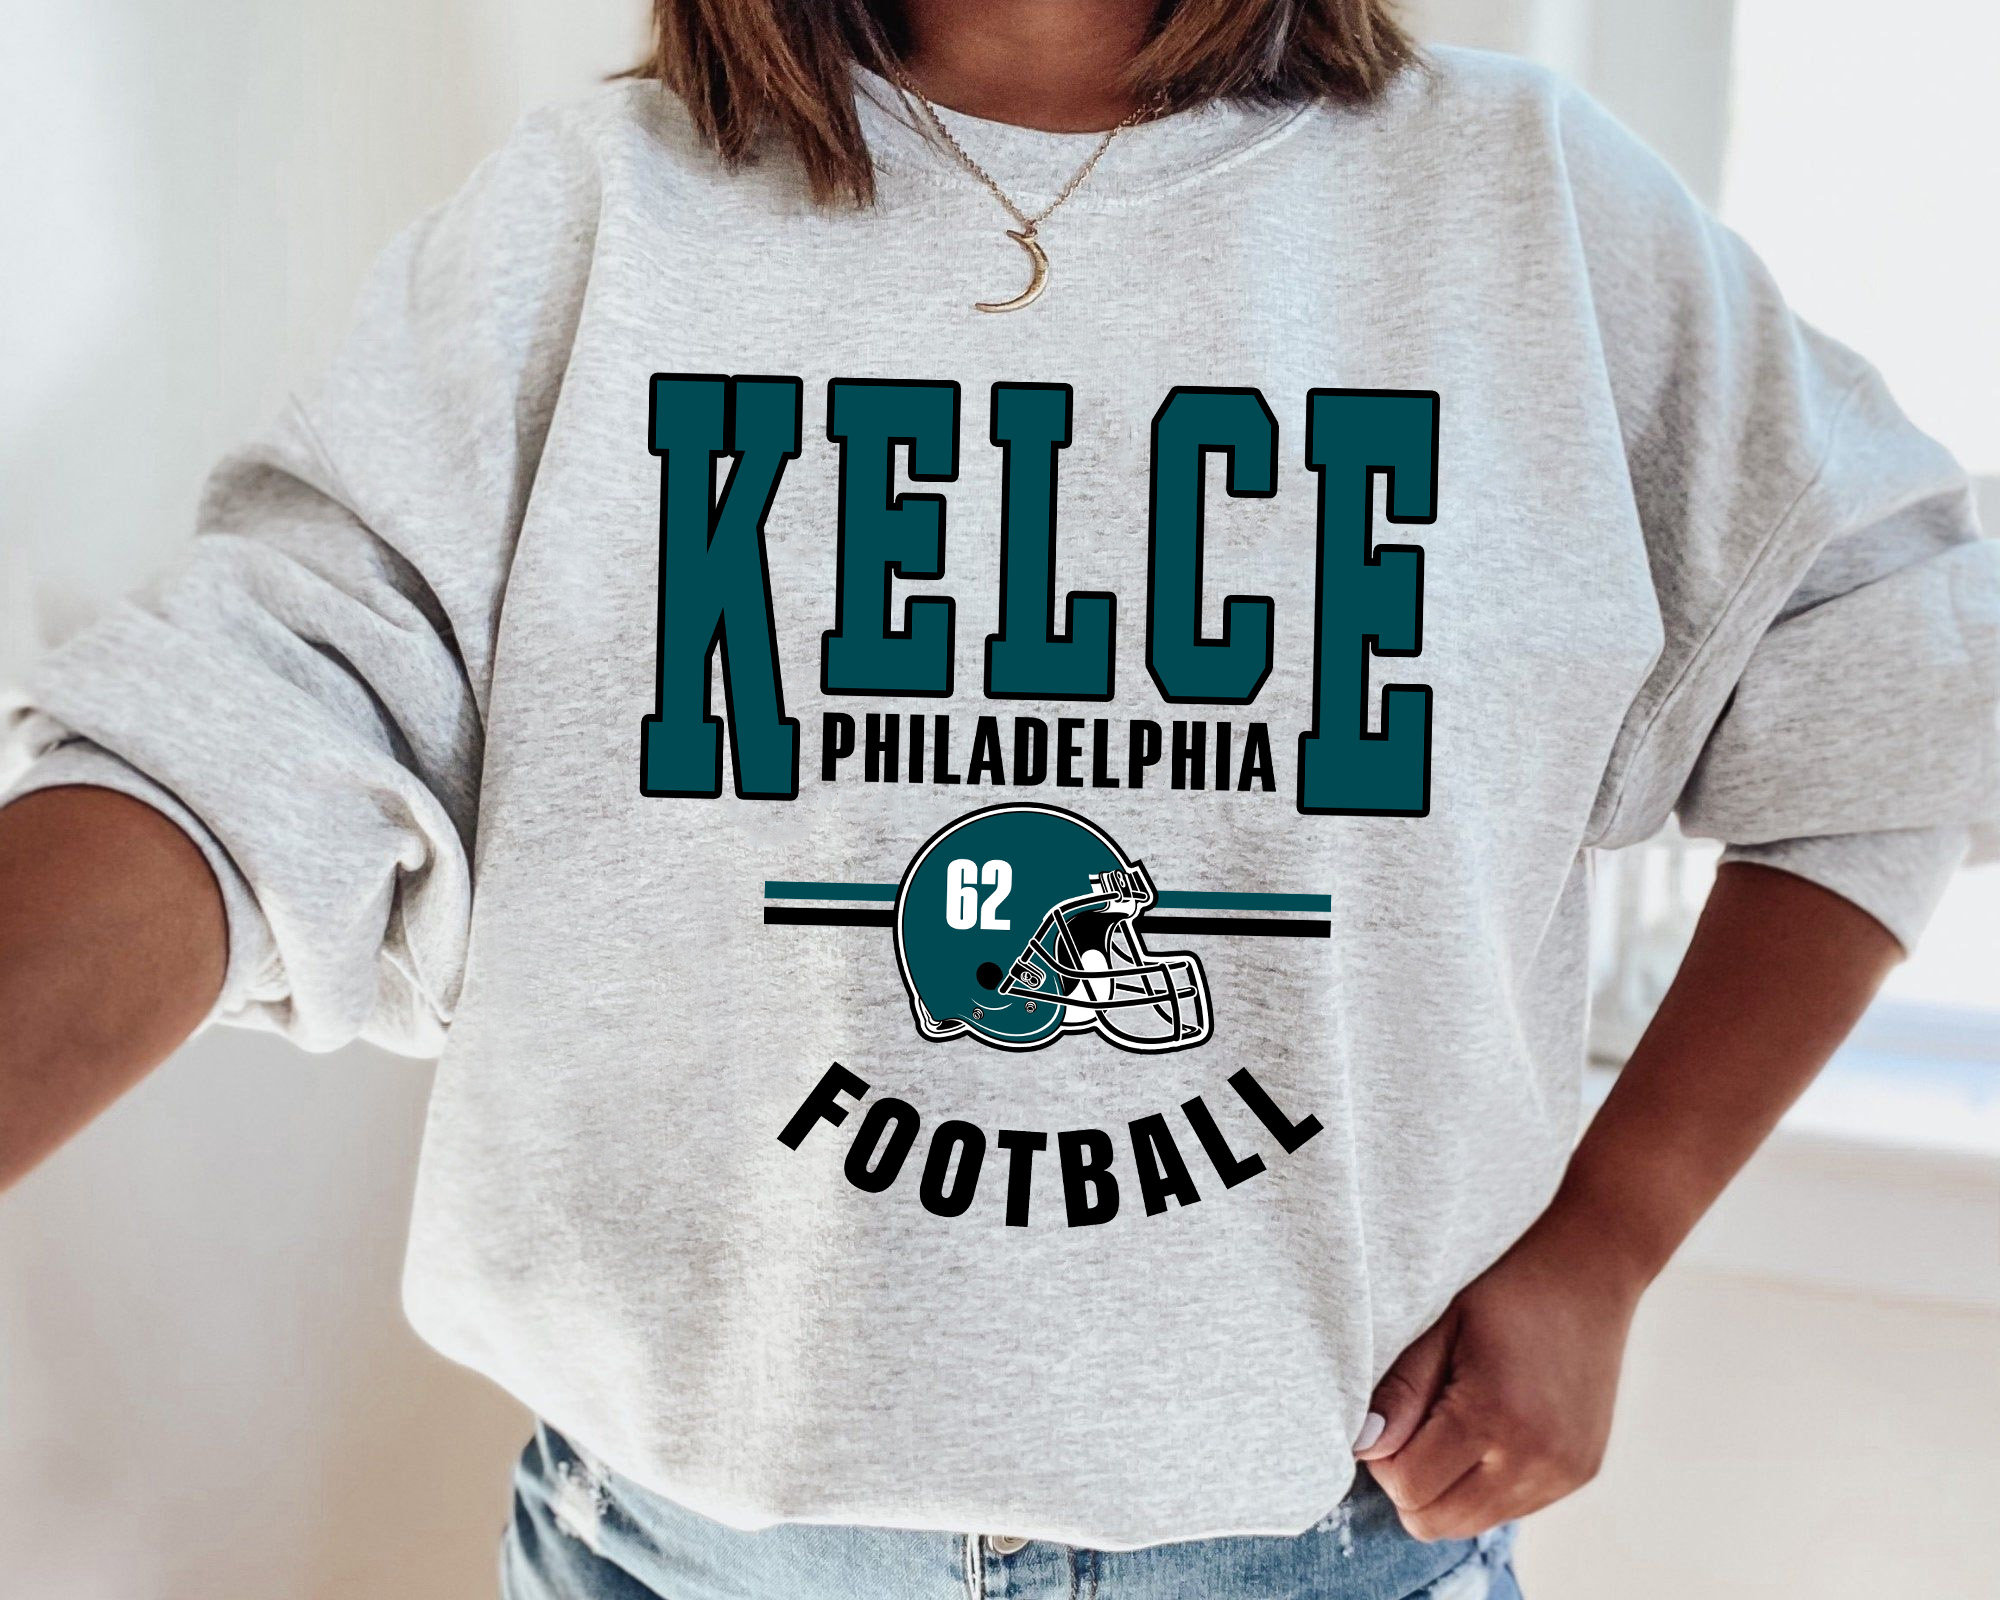 Philadelphia Eagles playoff shirts, hat, hoodies and more